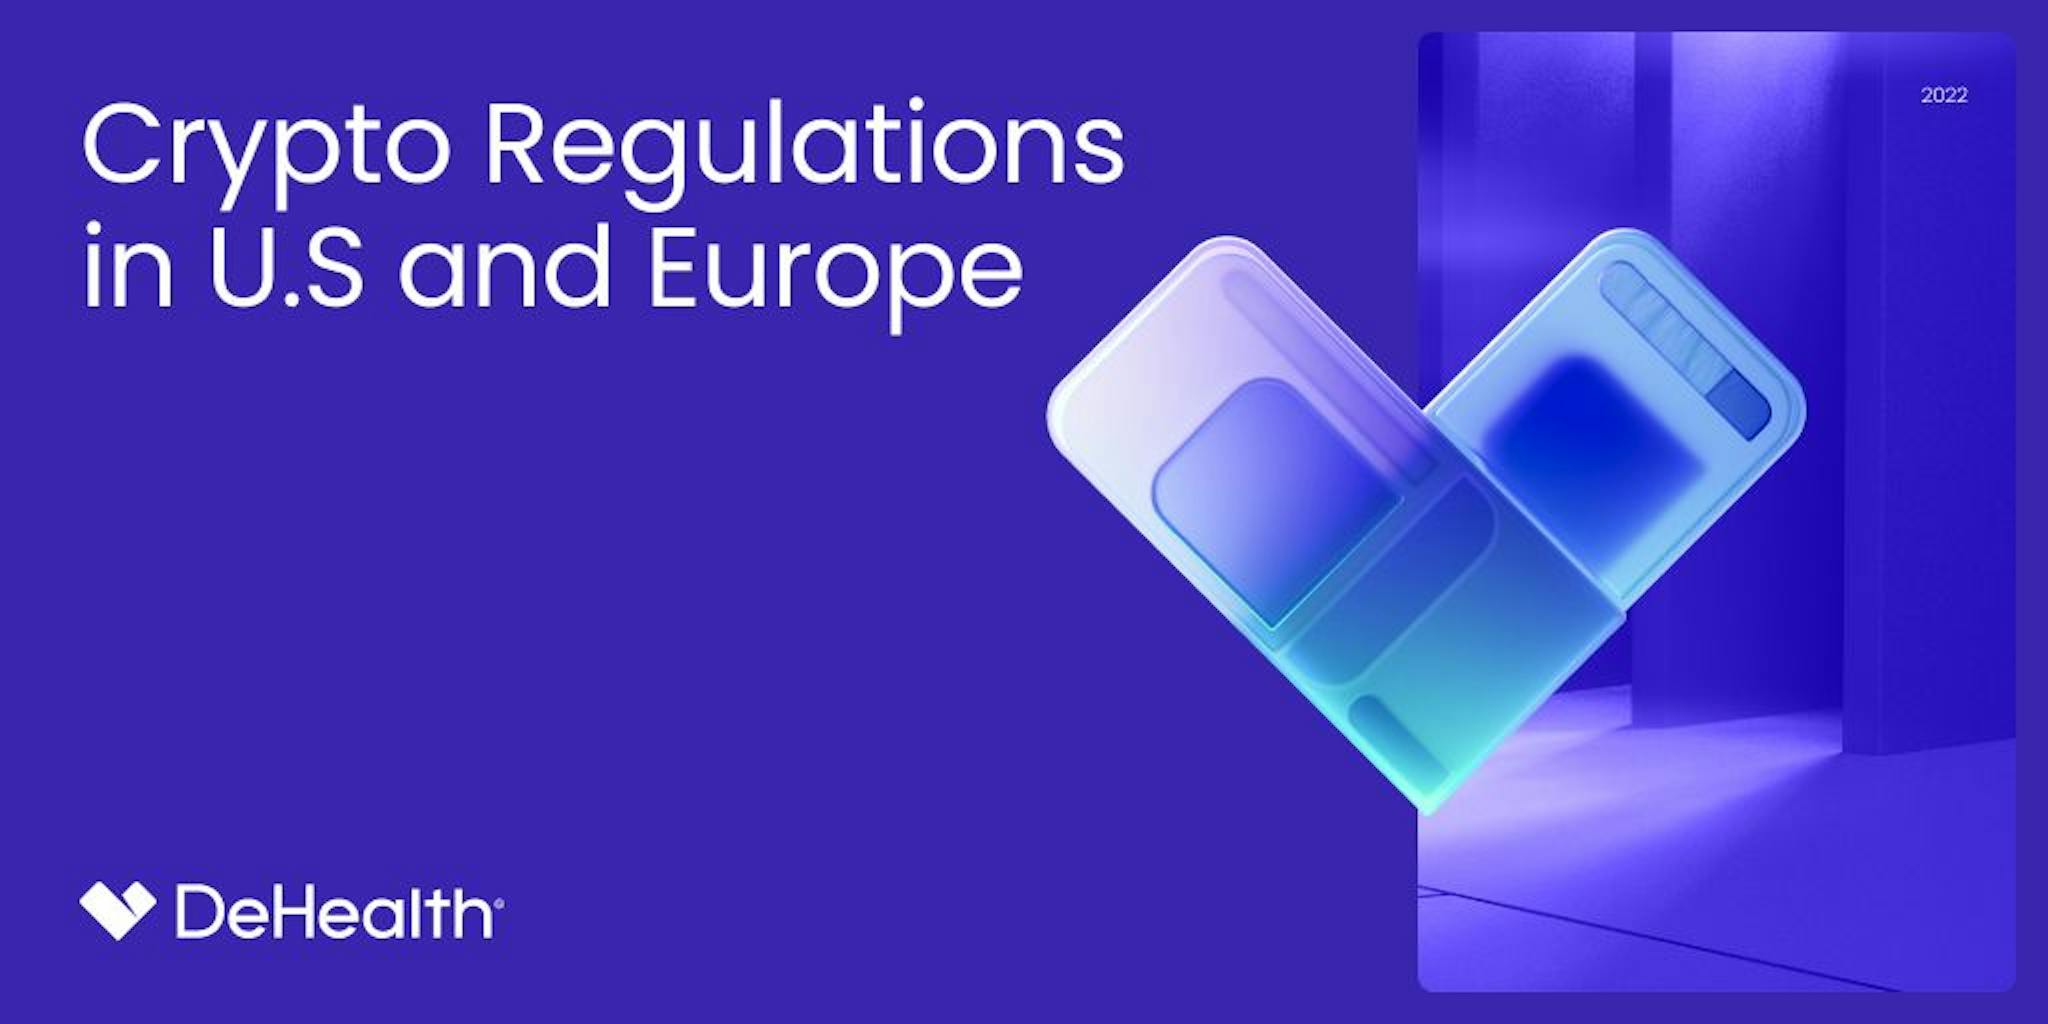 featured image - Crypto Regulations in U.S and Europe: Guide for a Novice Trader